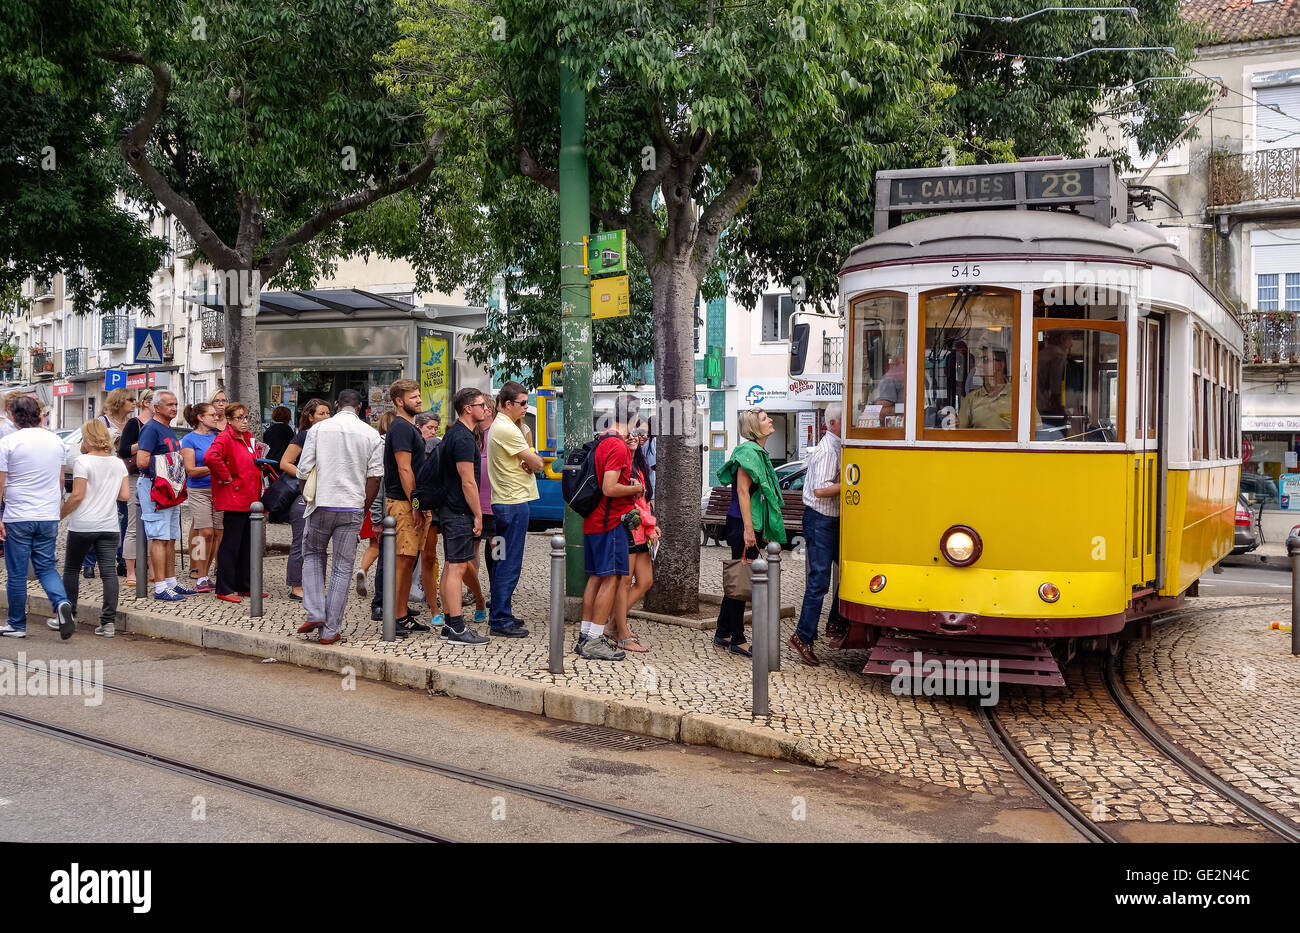 Lisbon, Portugal - September 19, 2014: People waiting at the tram stop. Tram is the symbol of the city. Stock Photo